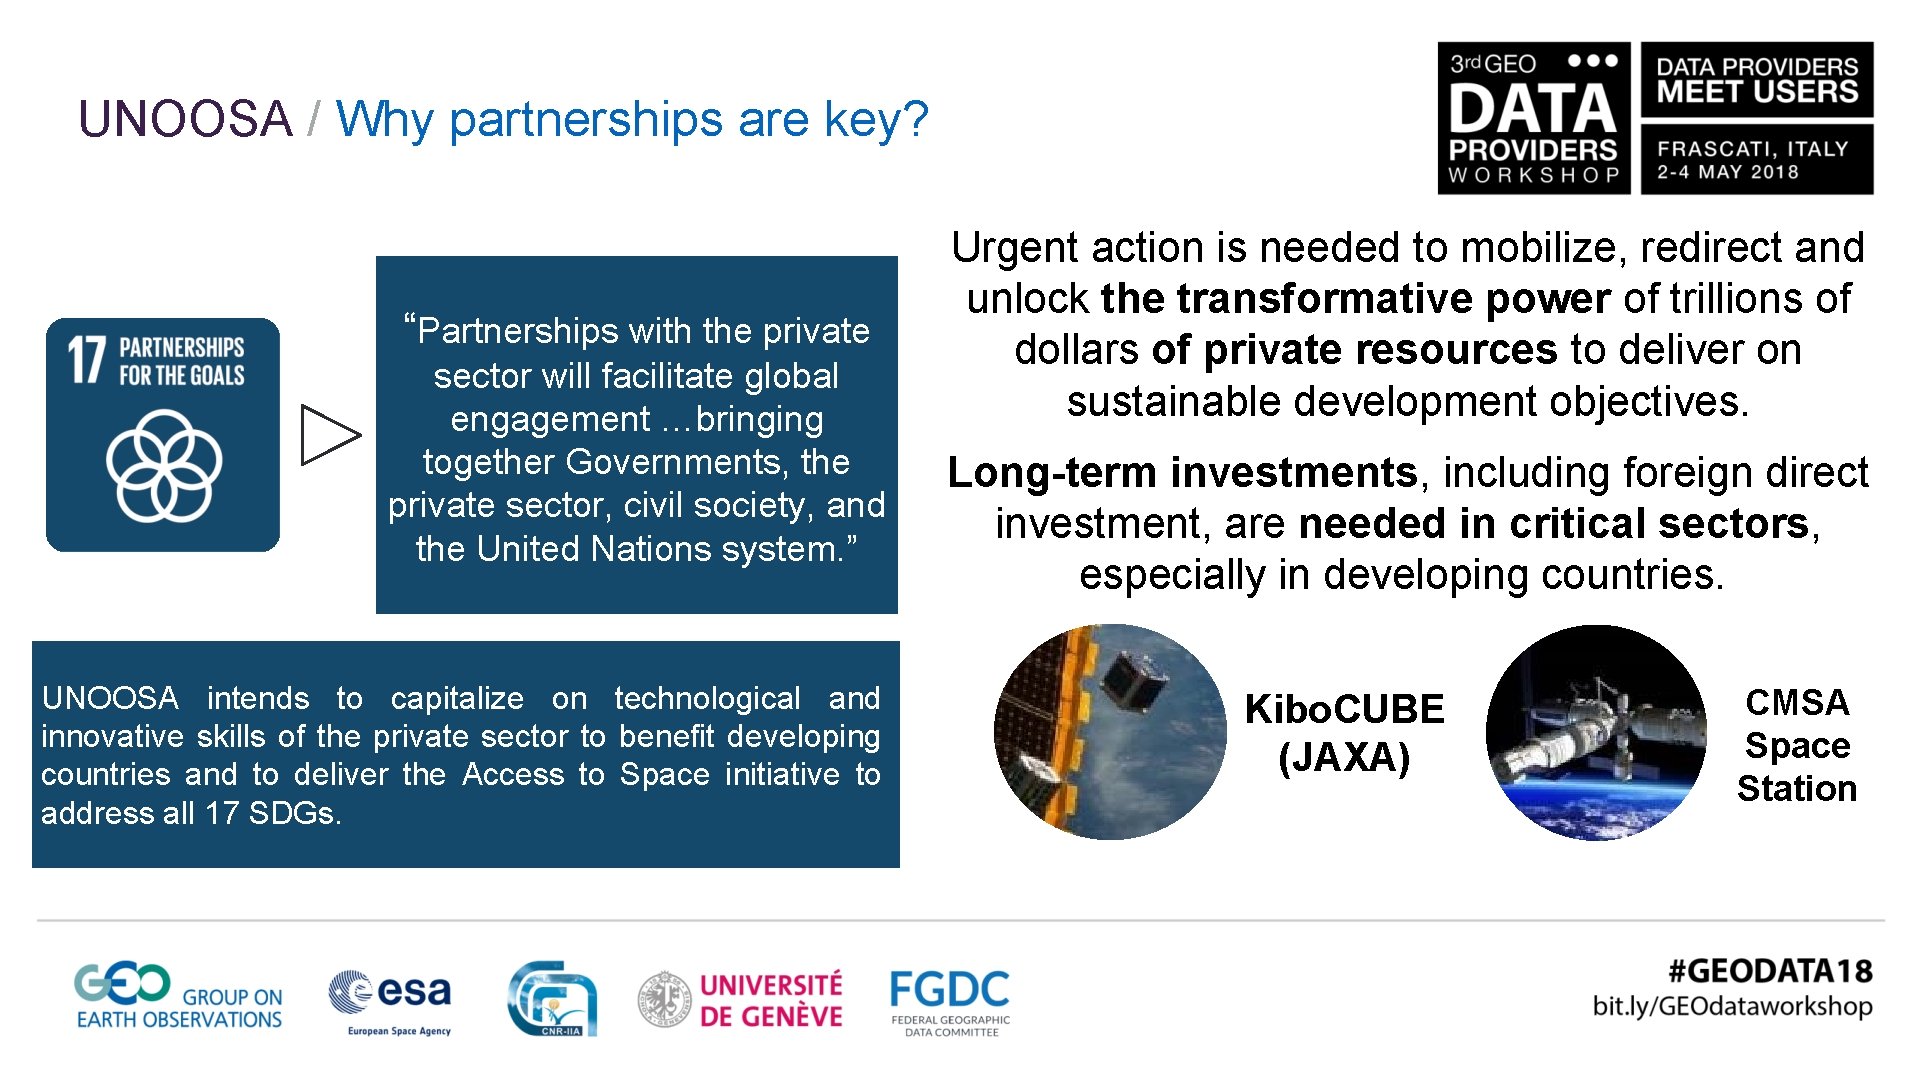 UNOOSA / Why partnerships are key? “Partnerships with the private sector will facilitate global